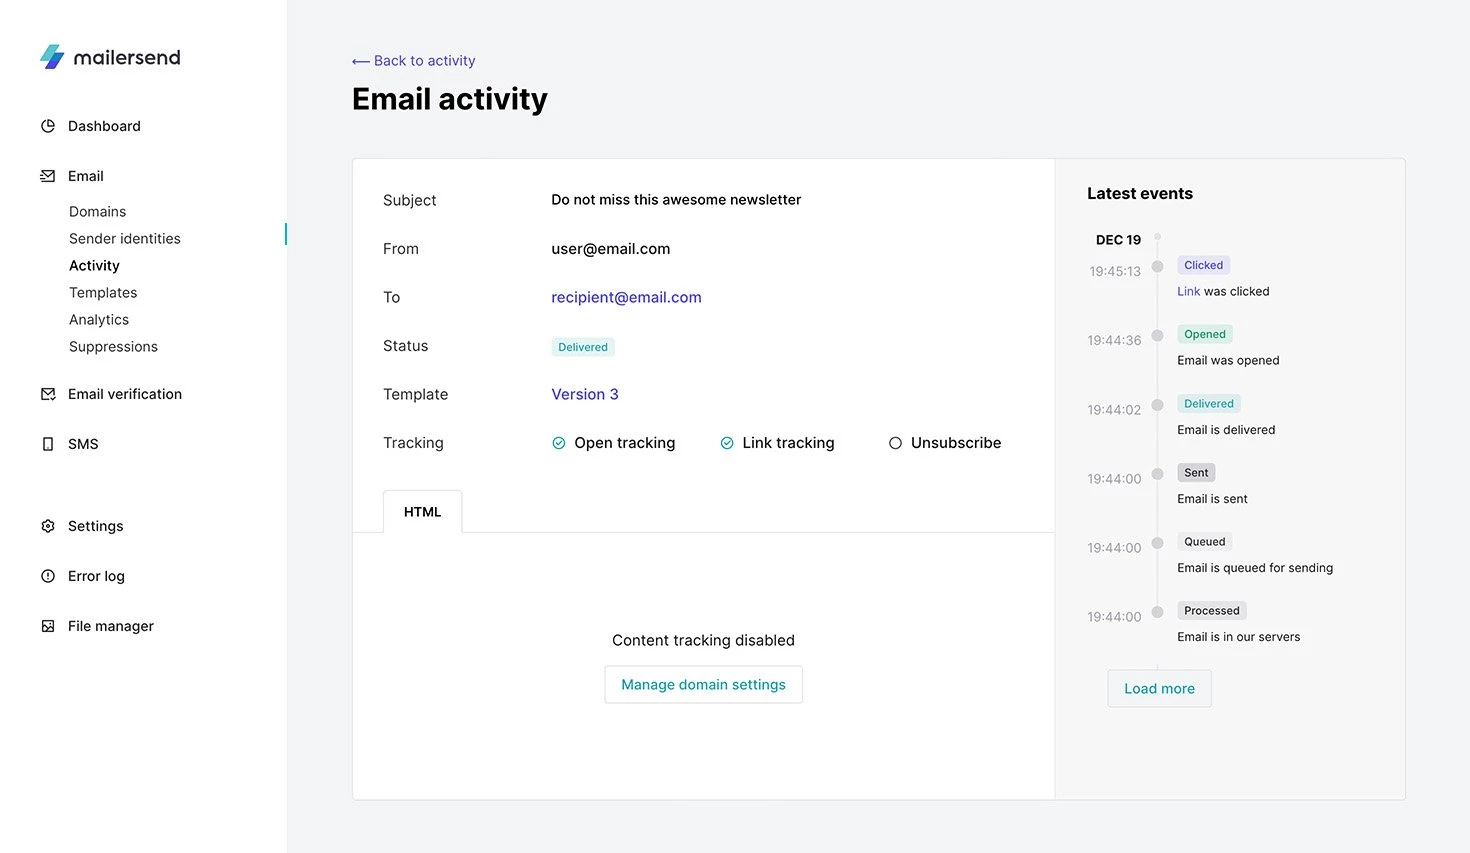 Display of the activity of a specific email in MailerSend.